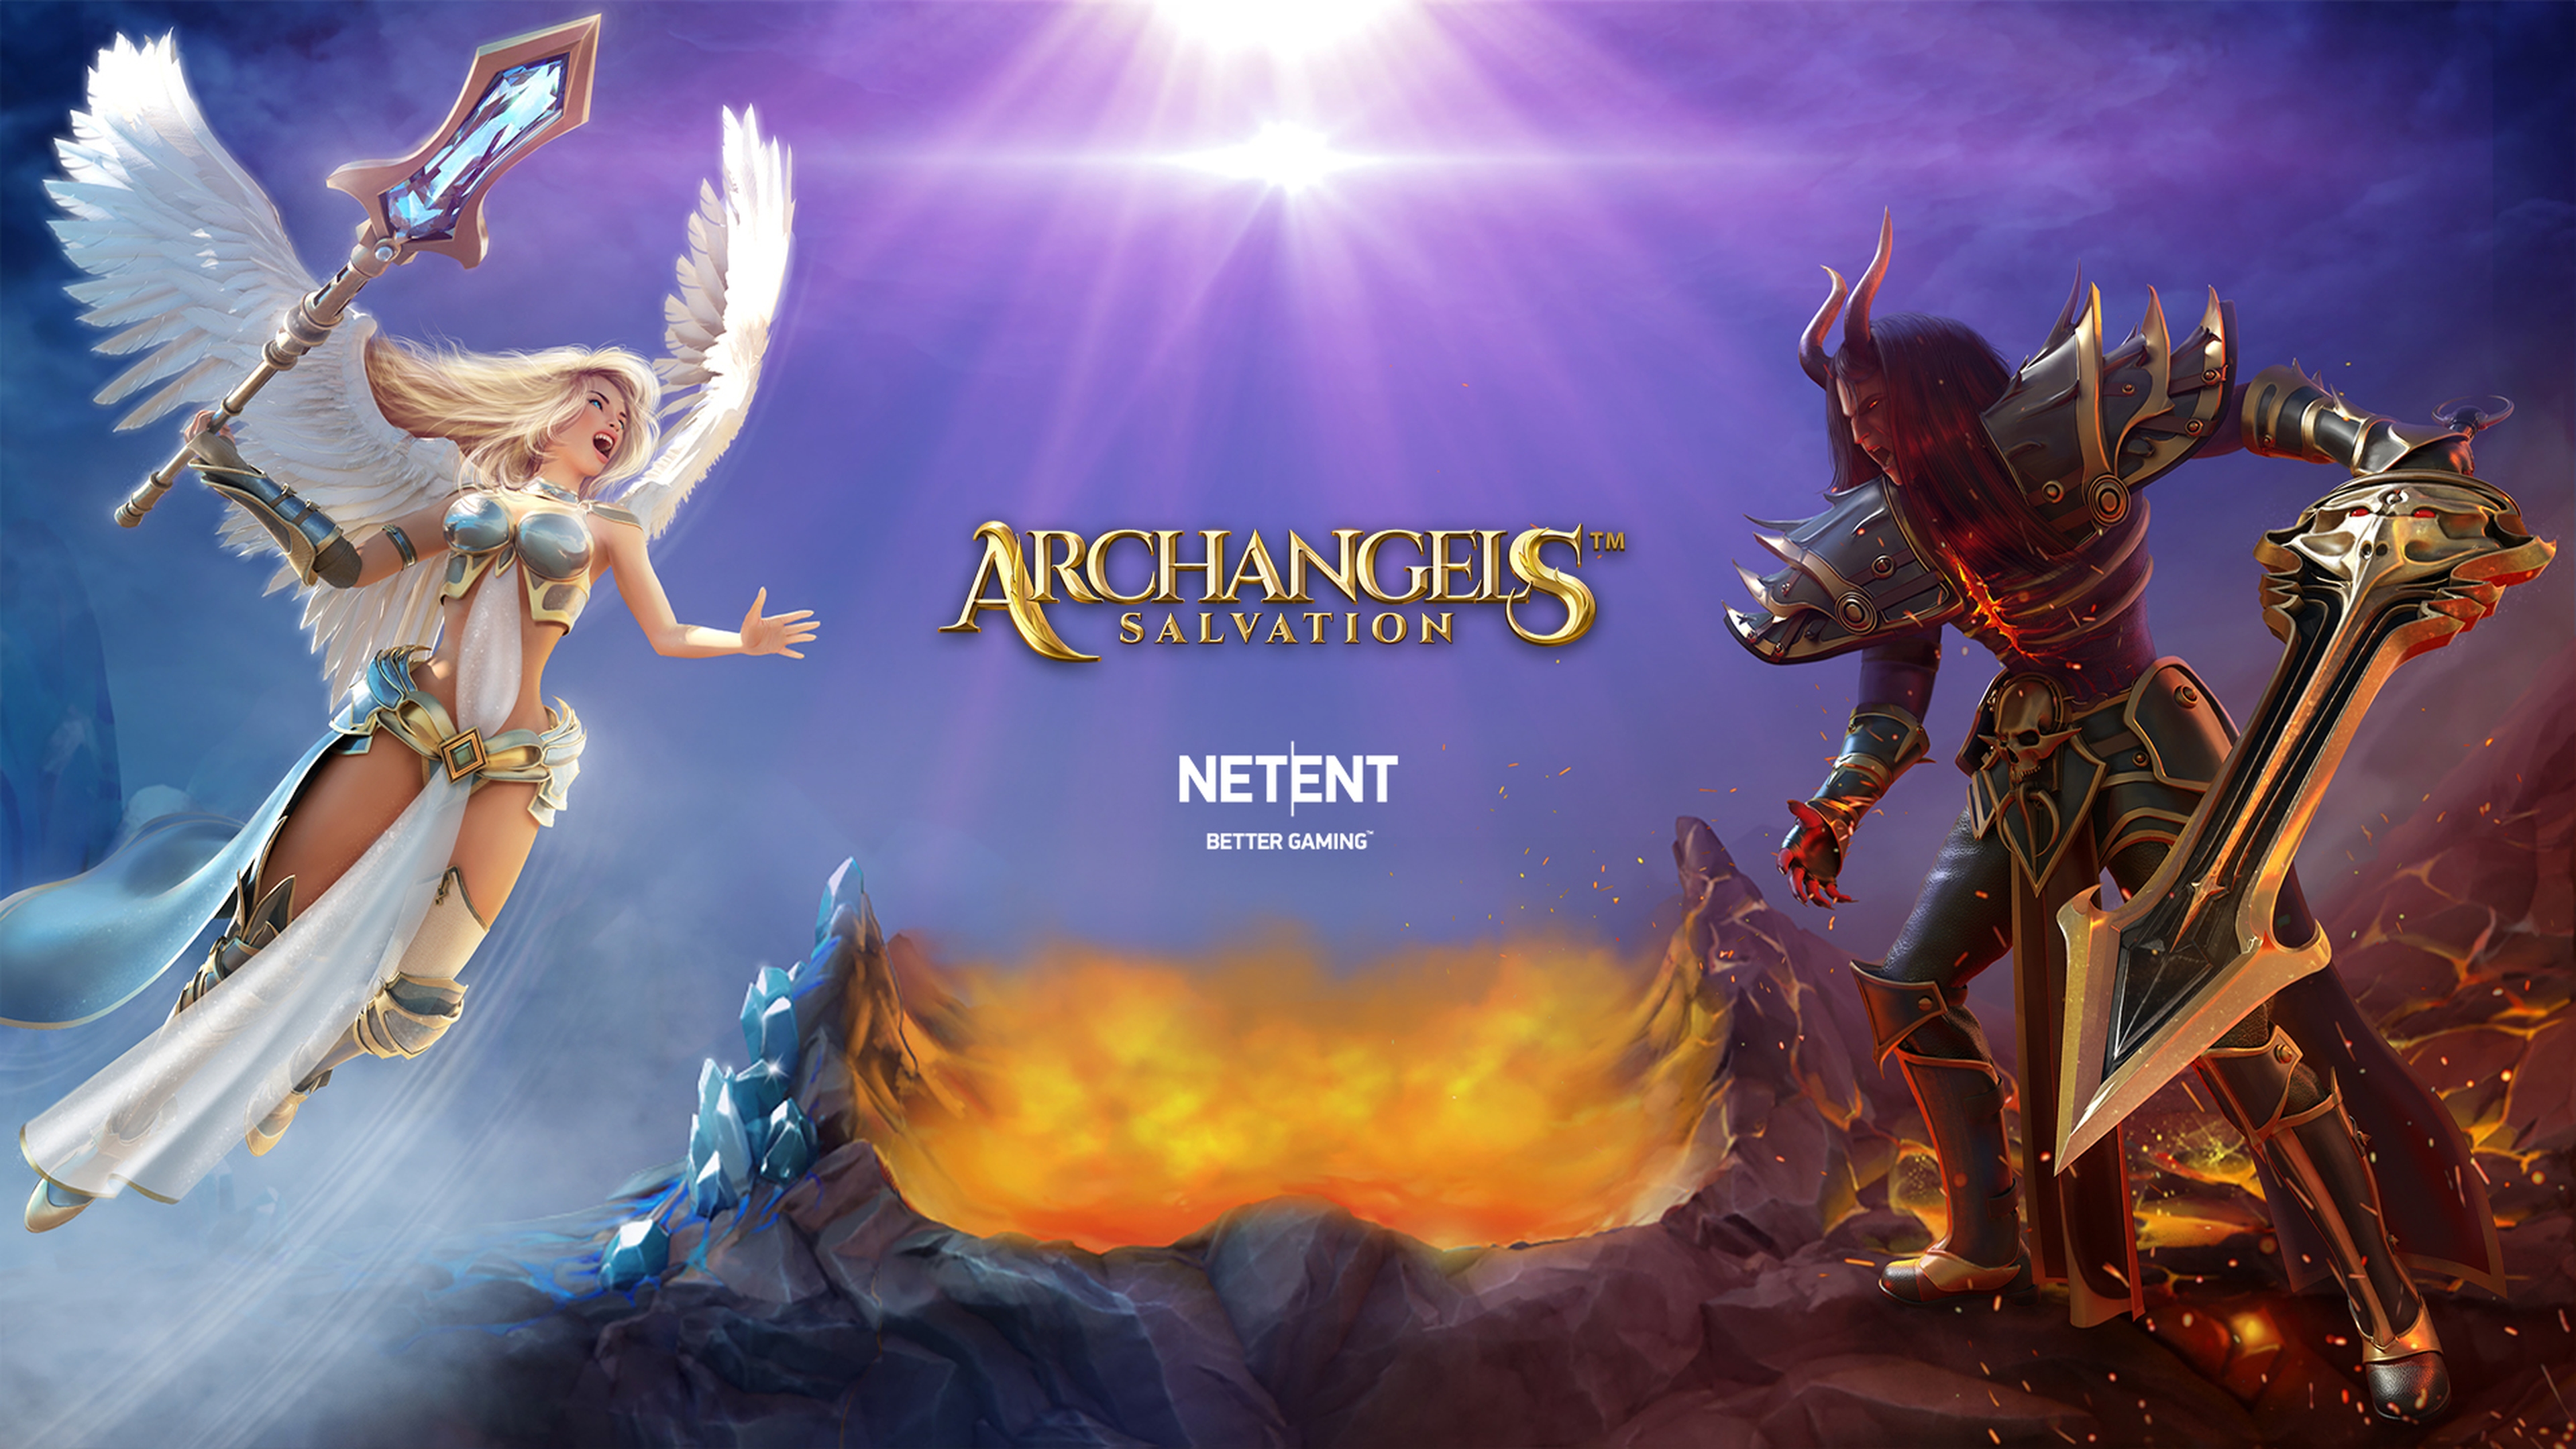 The Archangels: Salvation Online Slot Demo Game by NetEnt